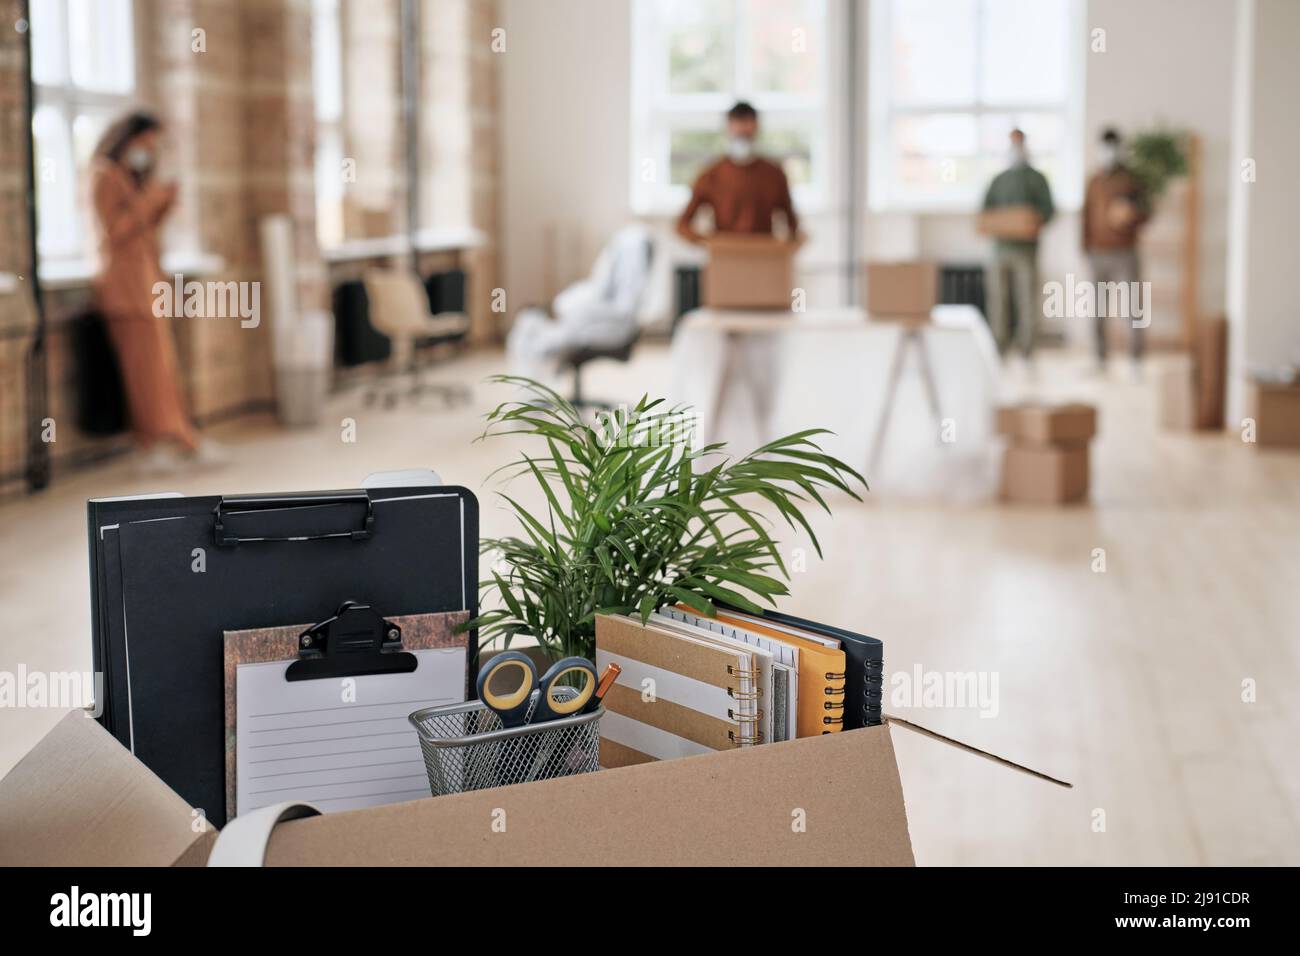 Focus on open cardboard box with office supplies, clipboards and plant against people moving into new office in background Stock Photo